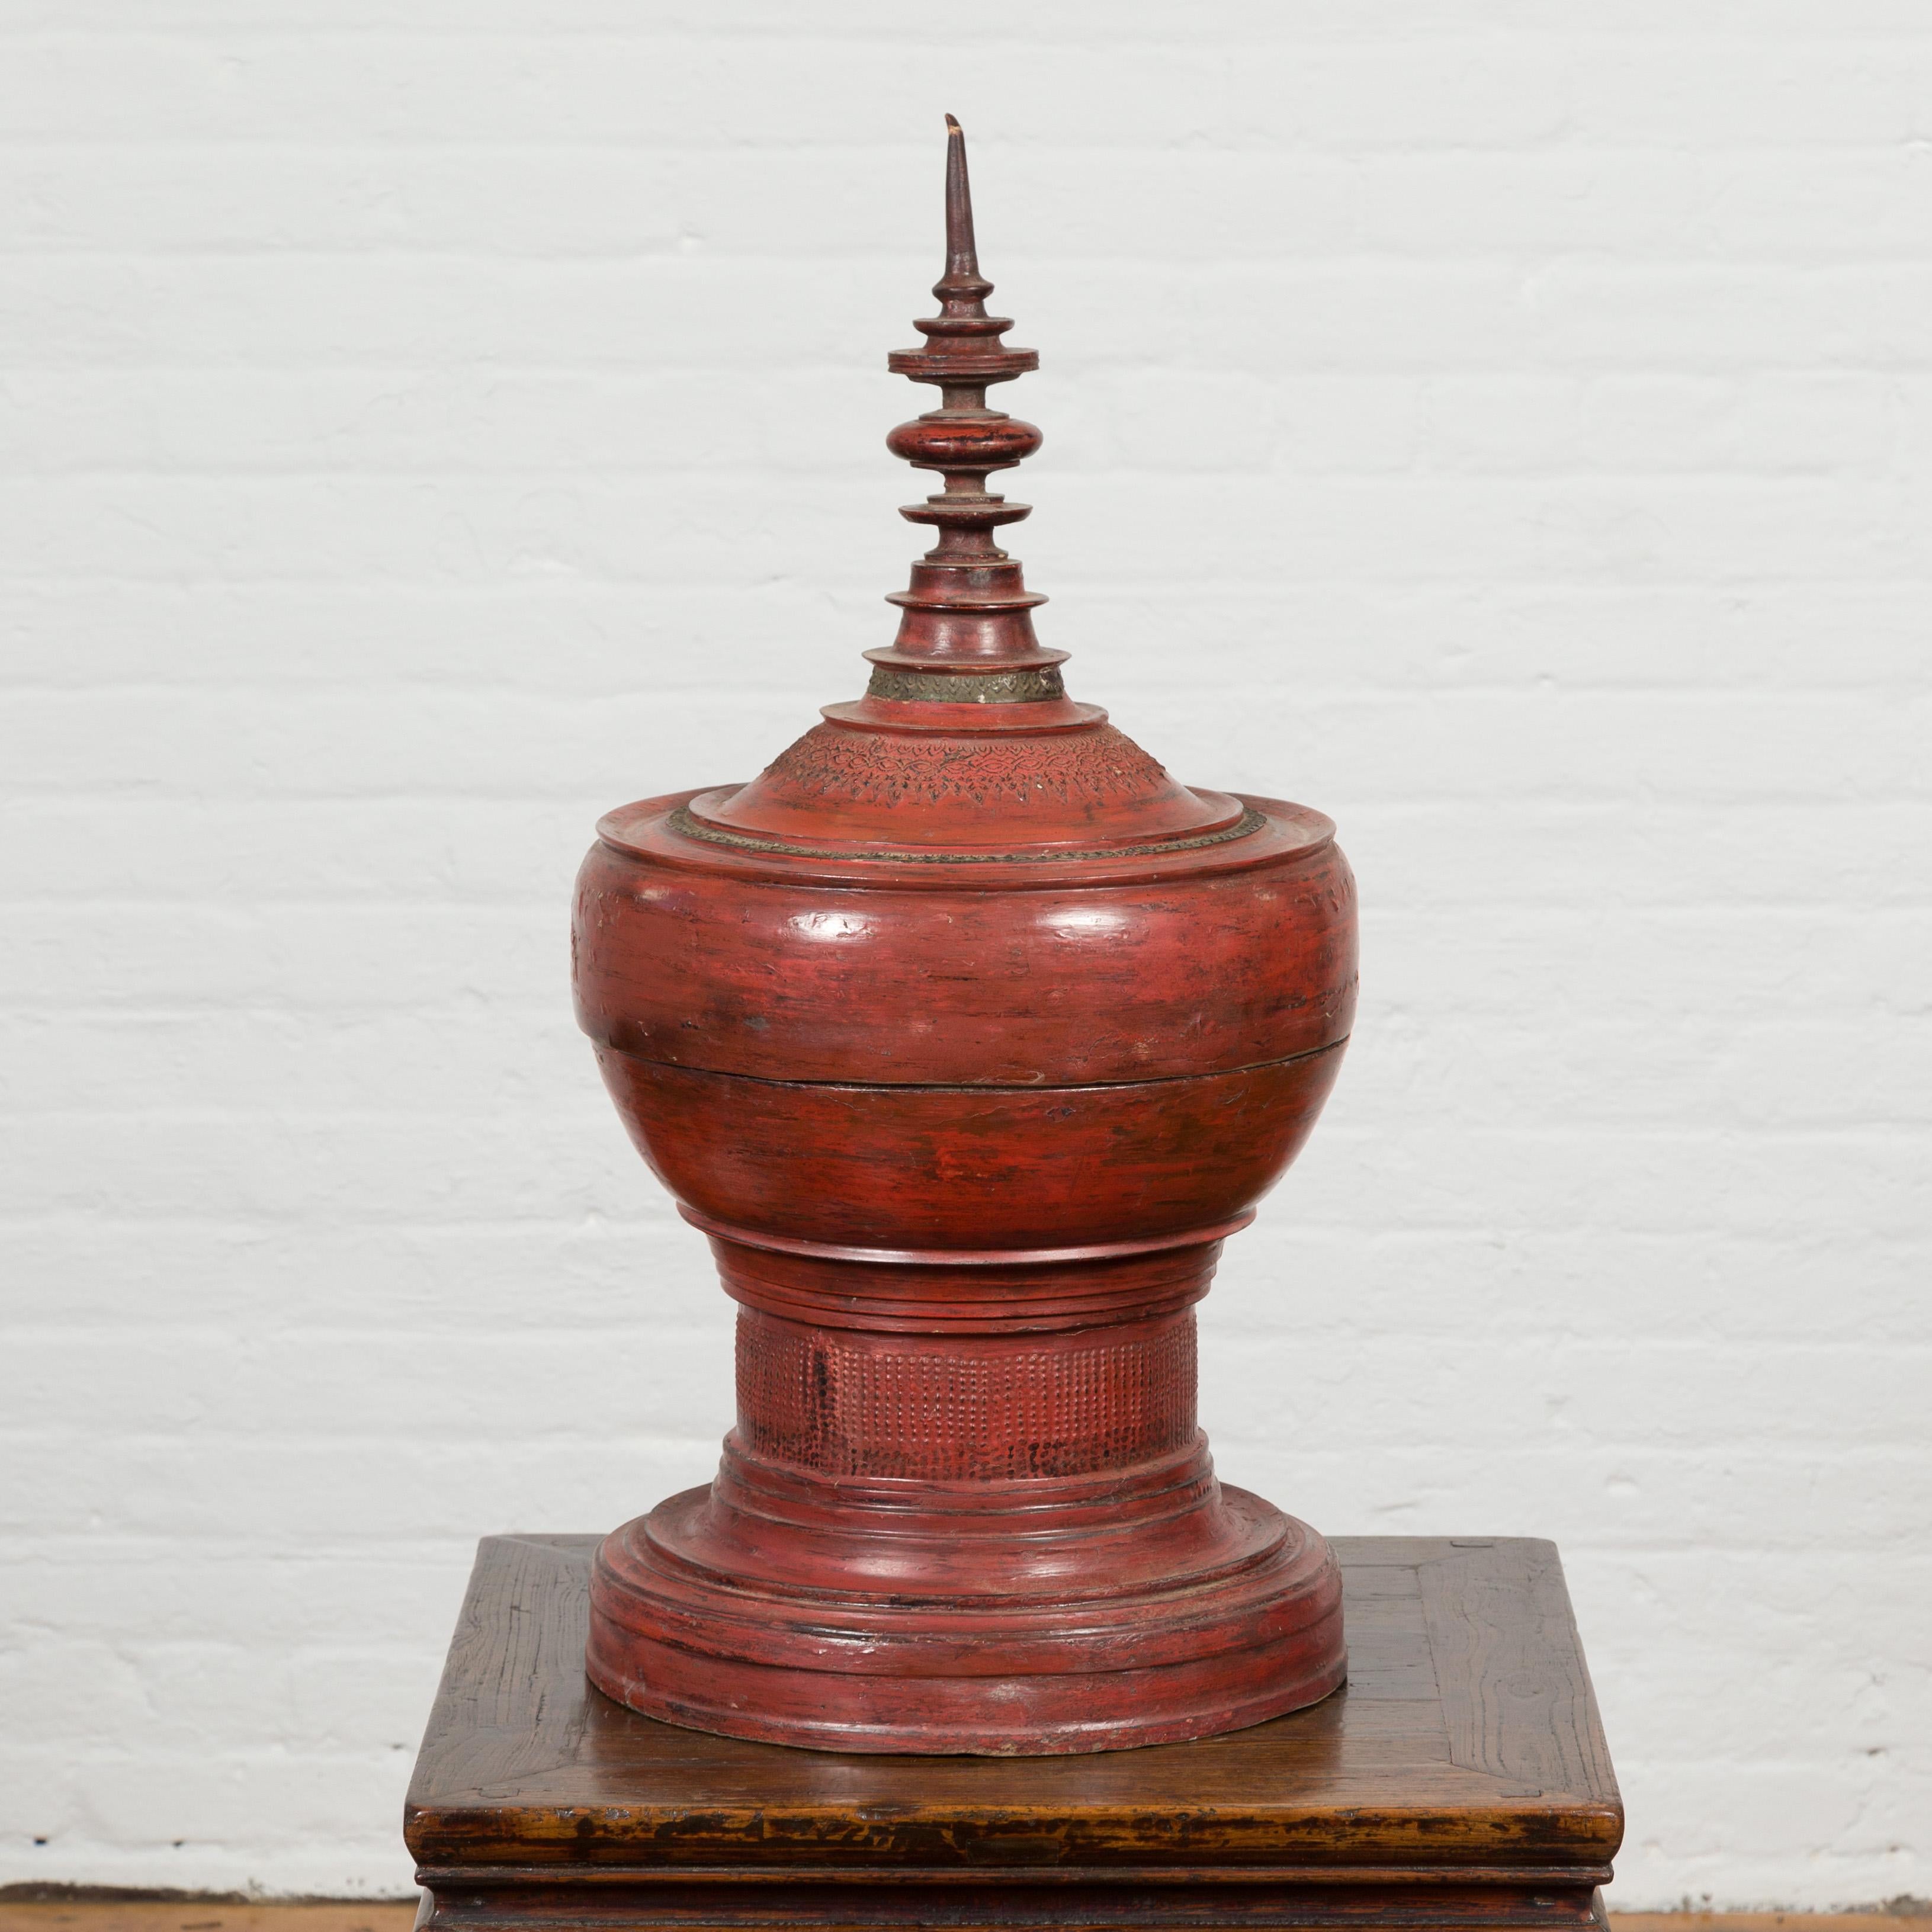 A Burmese cinnabar Palembang lacquer temple offering bowl from the 19th century, with spindle top. Created in Burma during the 19th century, this temple offering bowl is adorned with Palembang lacquer. Showcasing a (slightly crooked) spindle top,